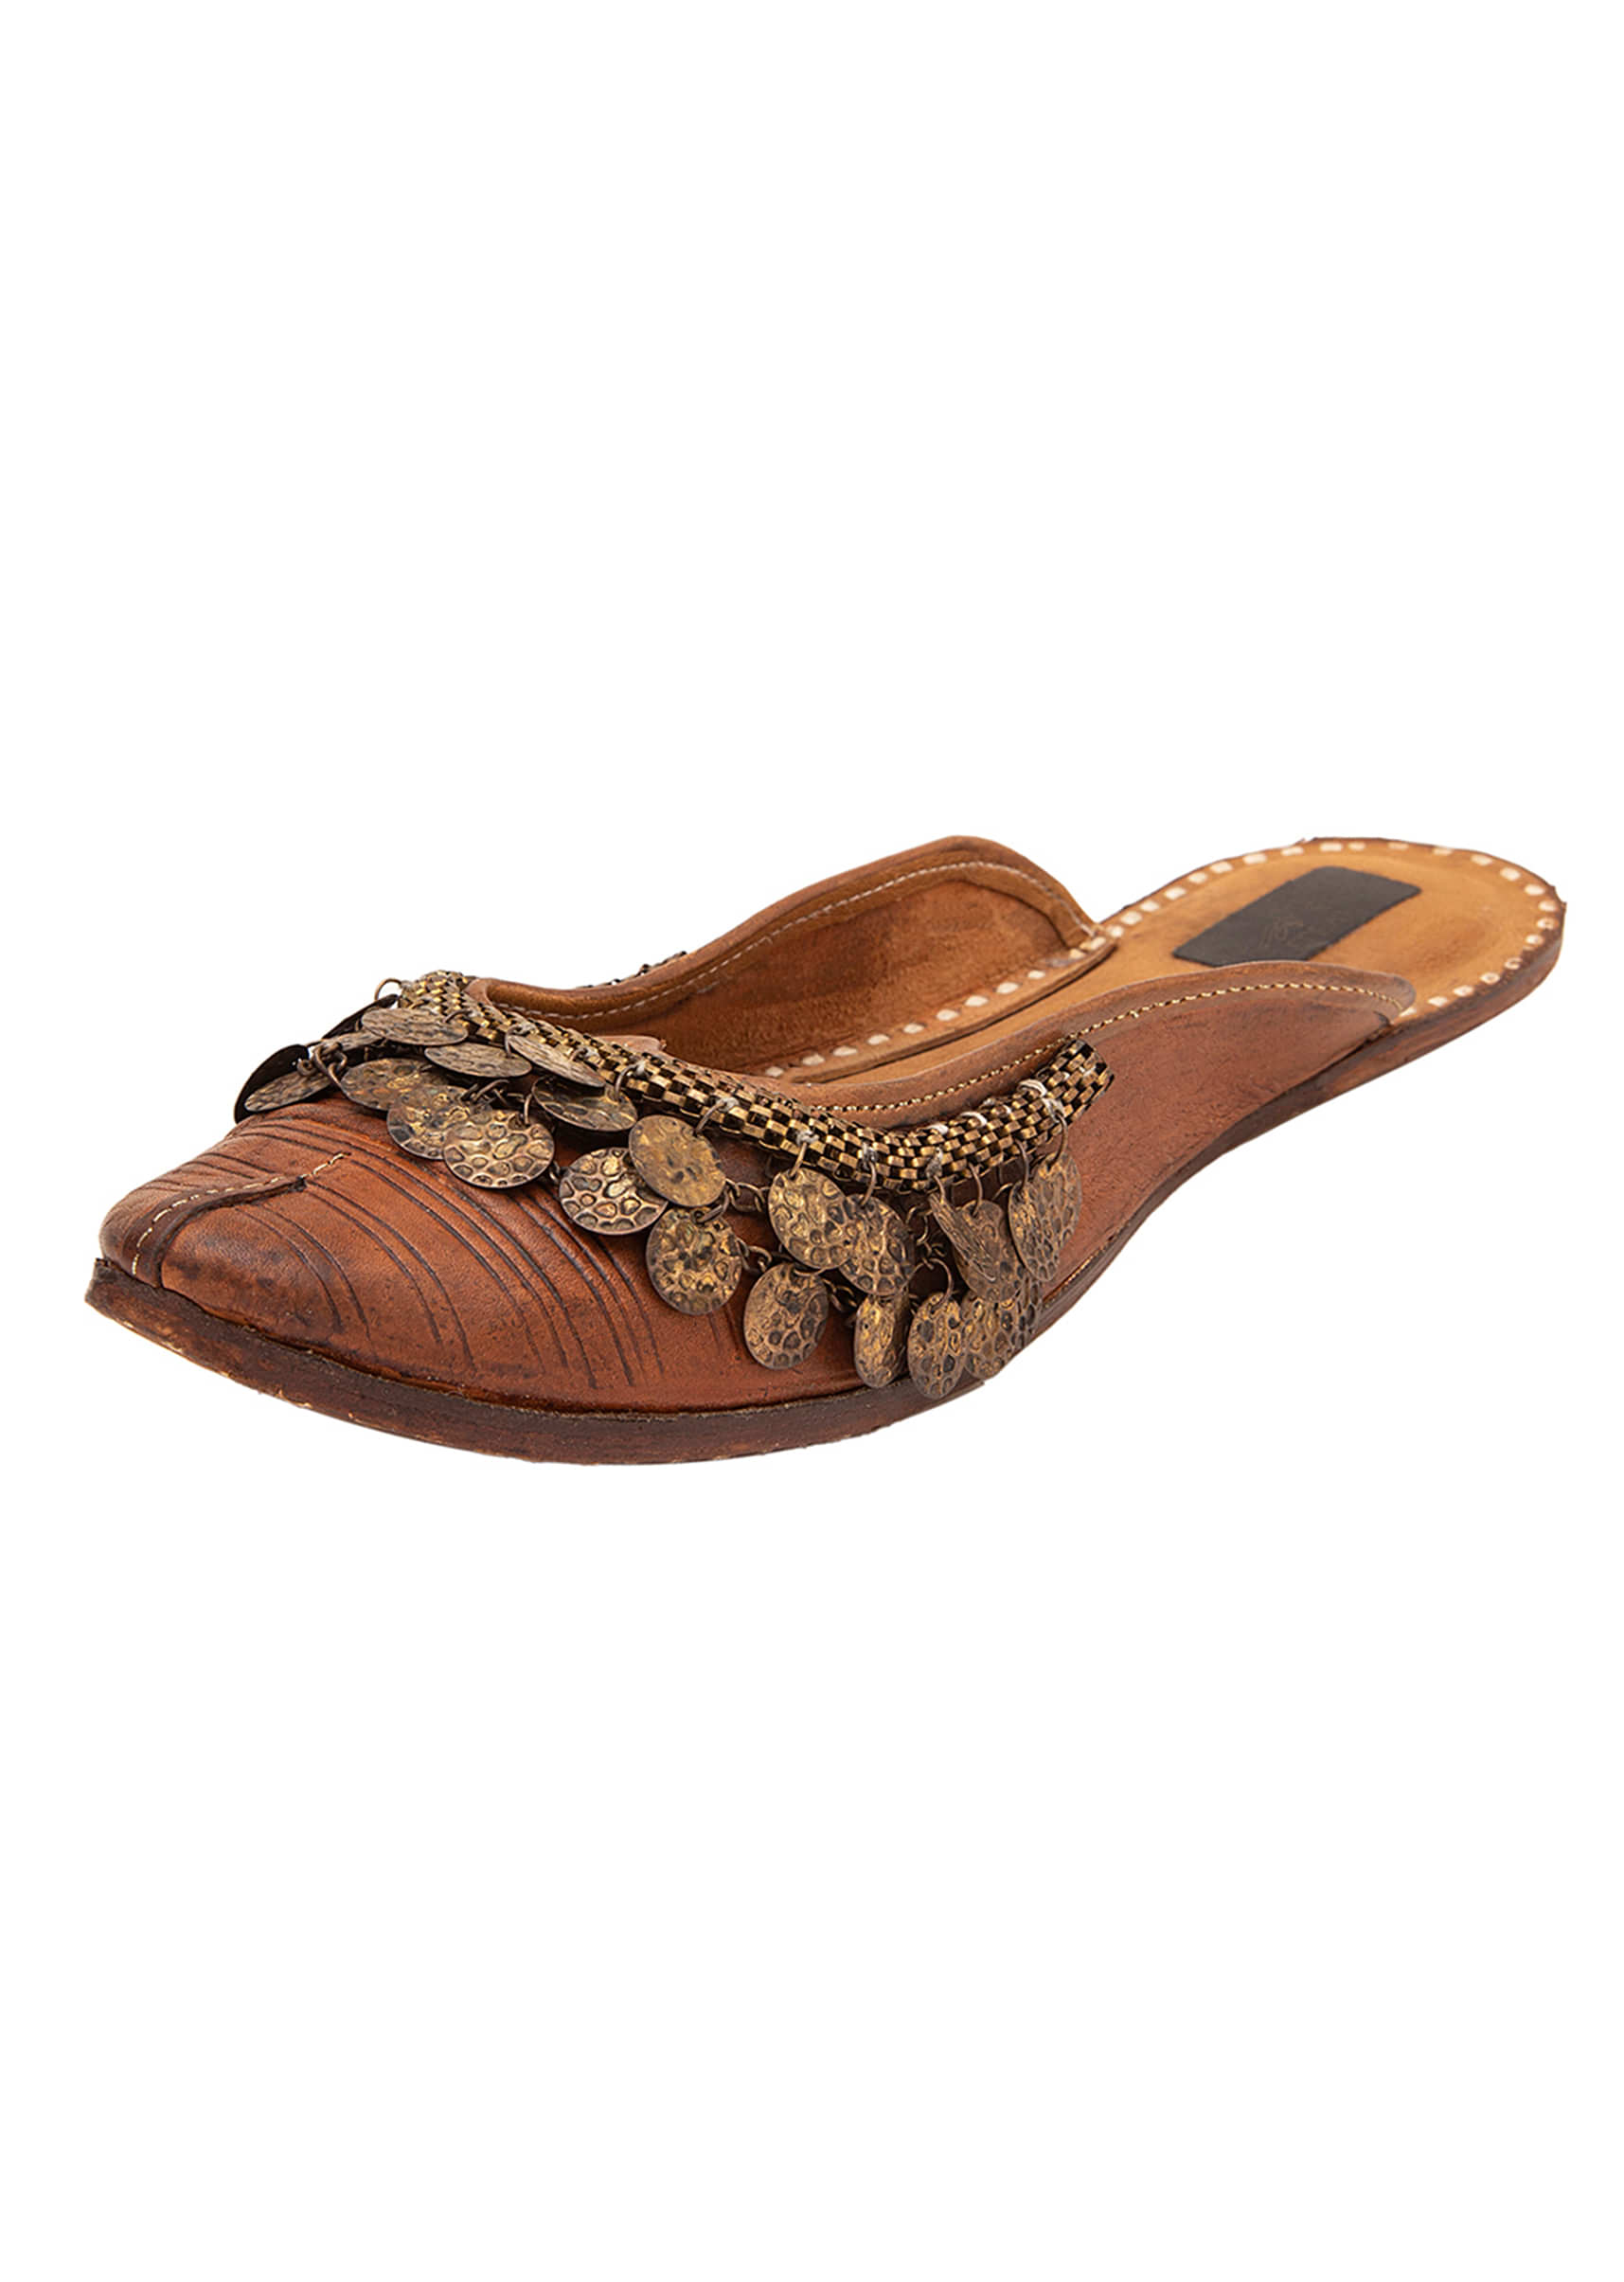 Brown Pure Leather Juttis Handcrafted With Coin Embellishments